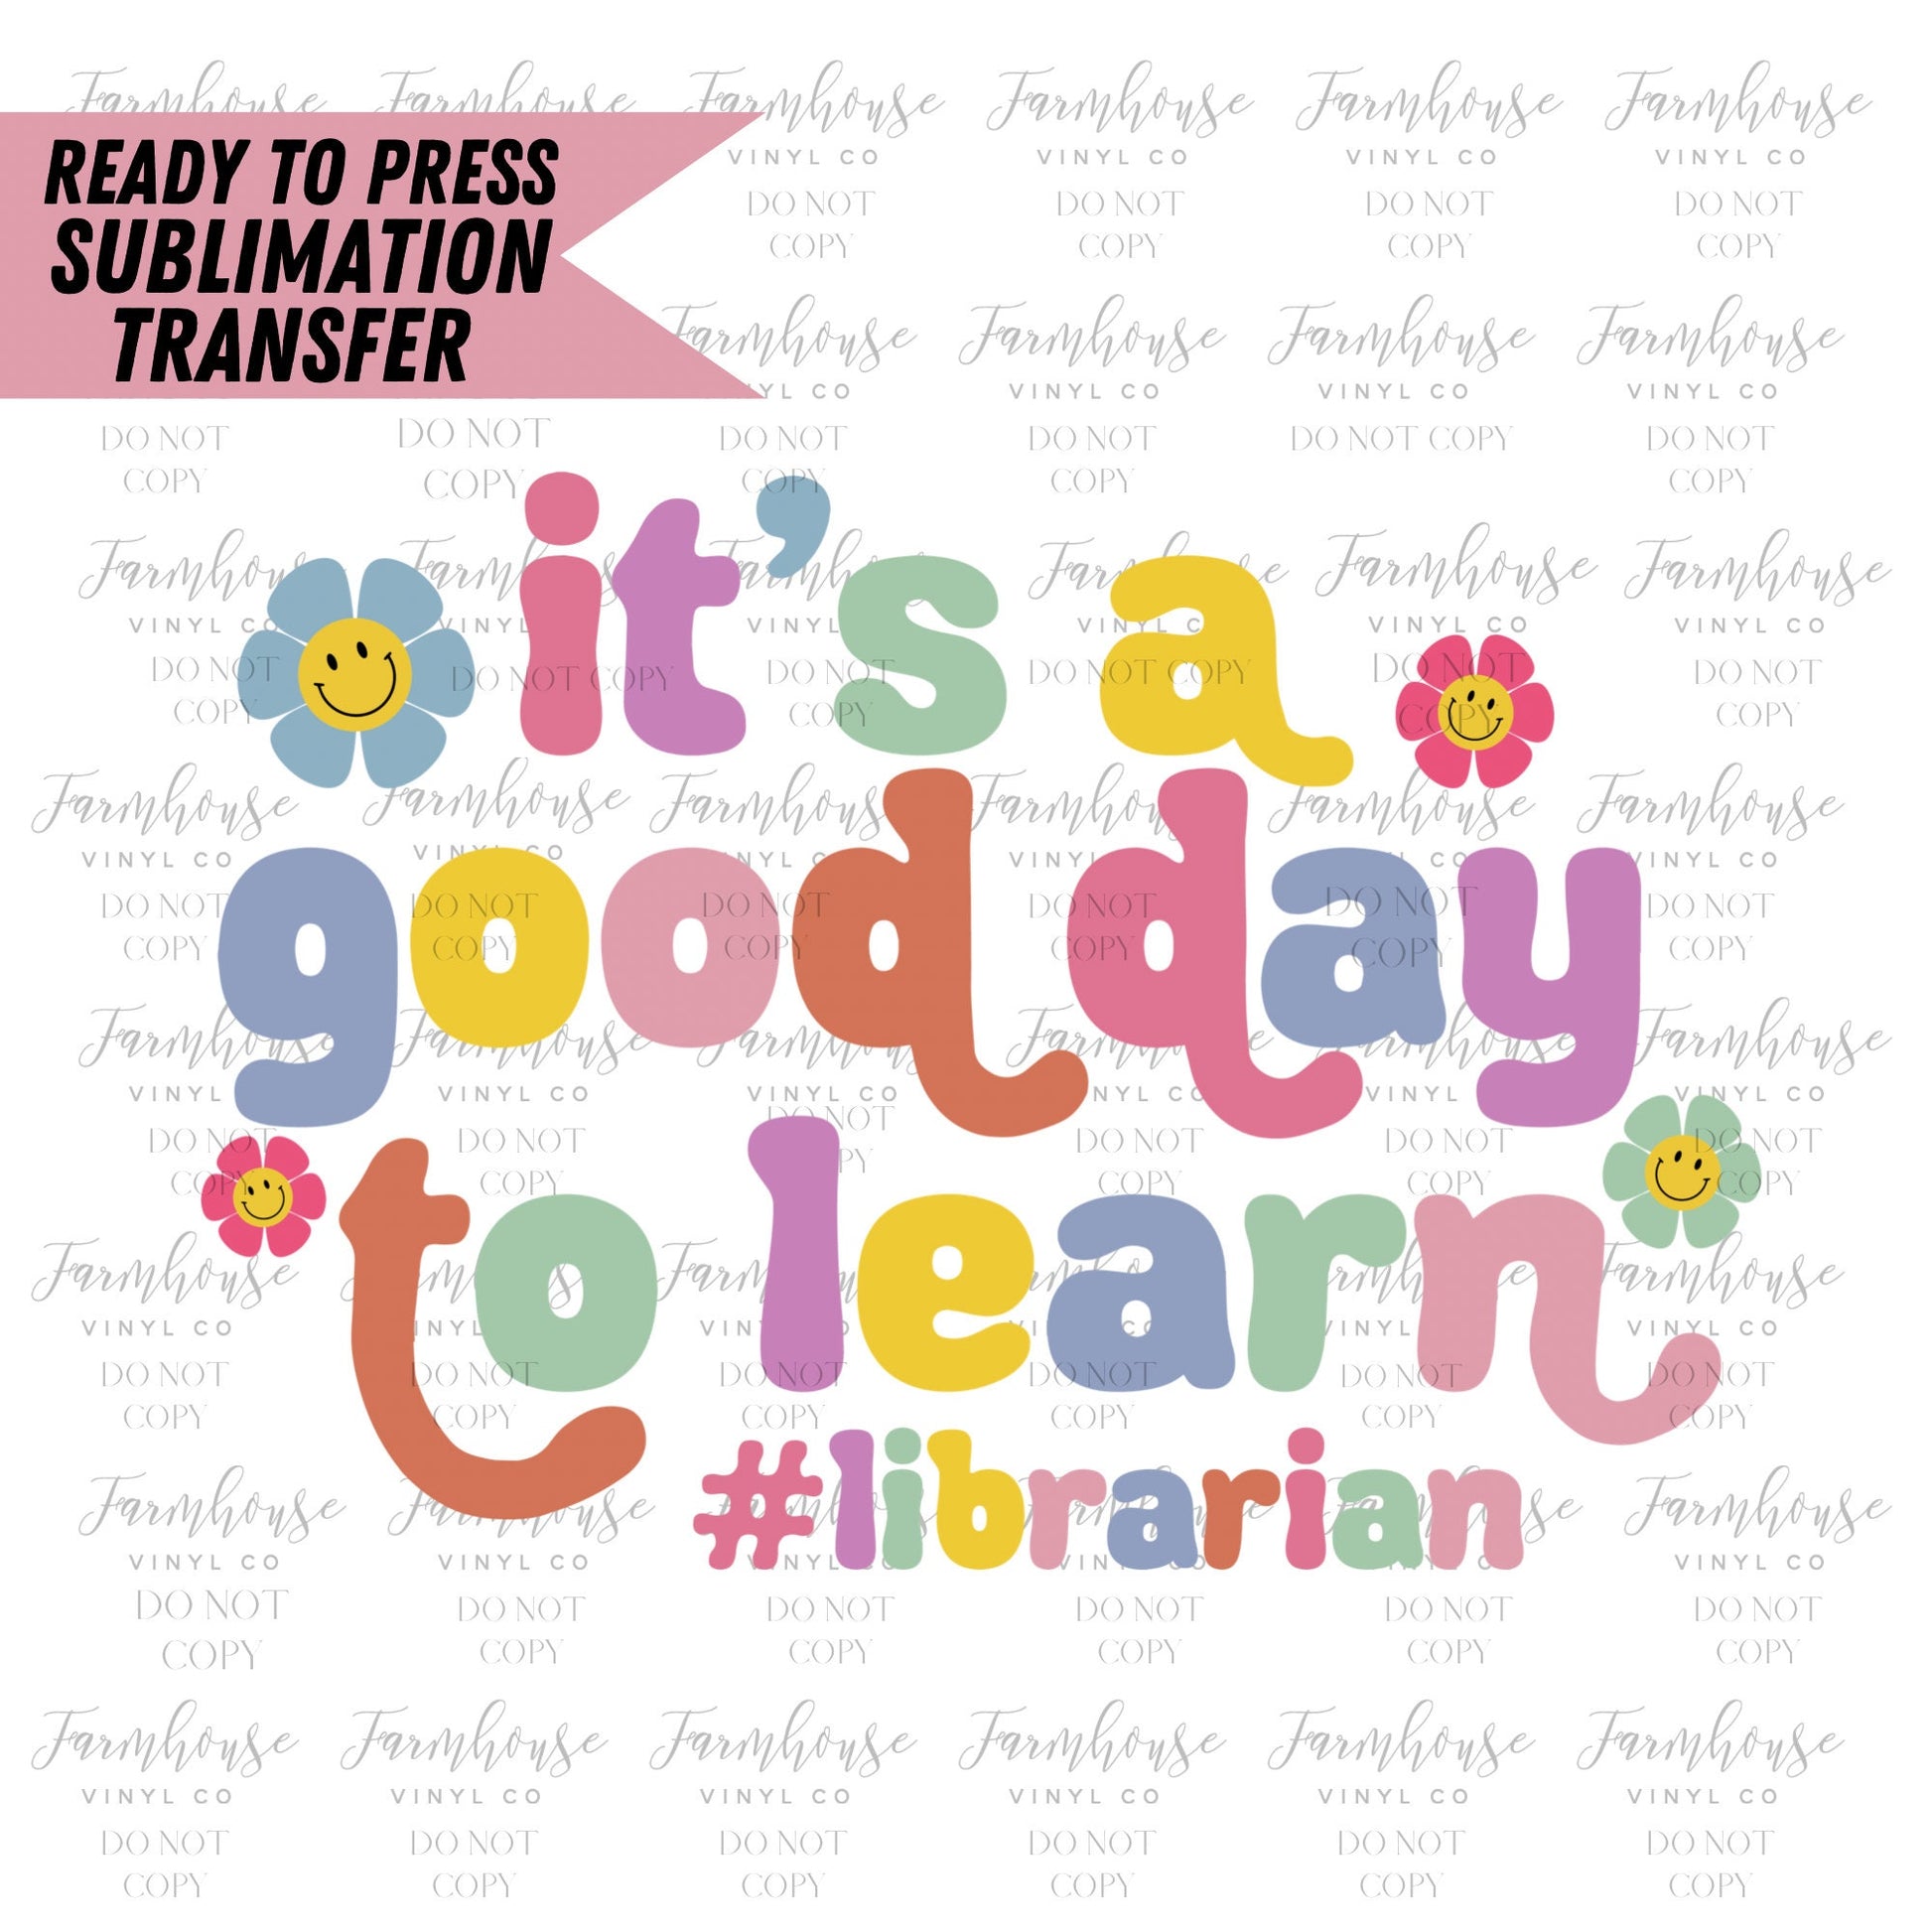 It's A Good Day to Learn, Ready to Press Sublimation Transfer, Sublimation Transfer, Heat Transfer, Trending Graphic 22-23, Retro School - Farmhouse Vinyl Co